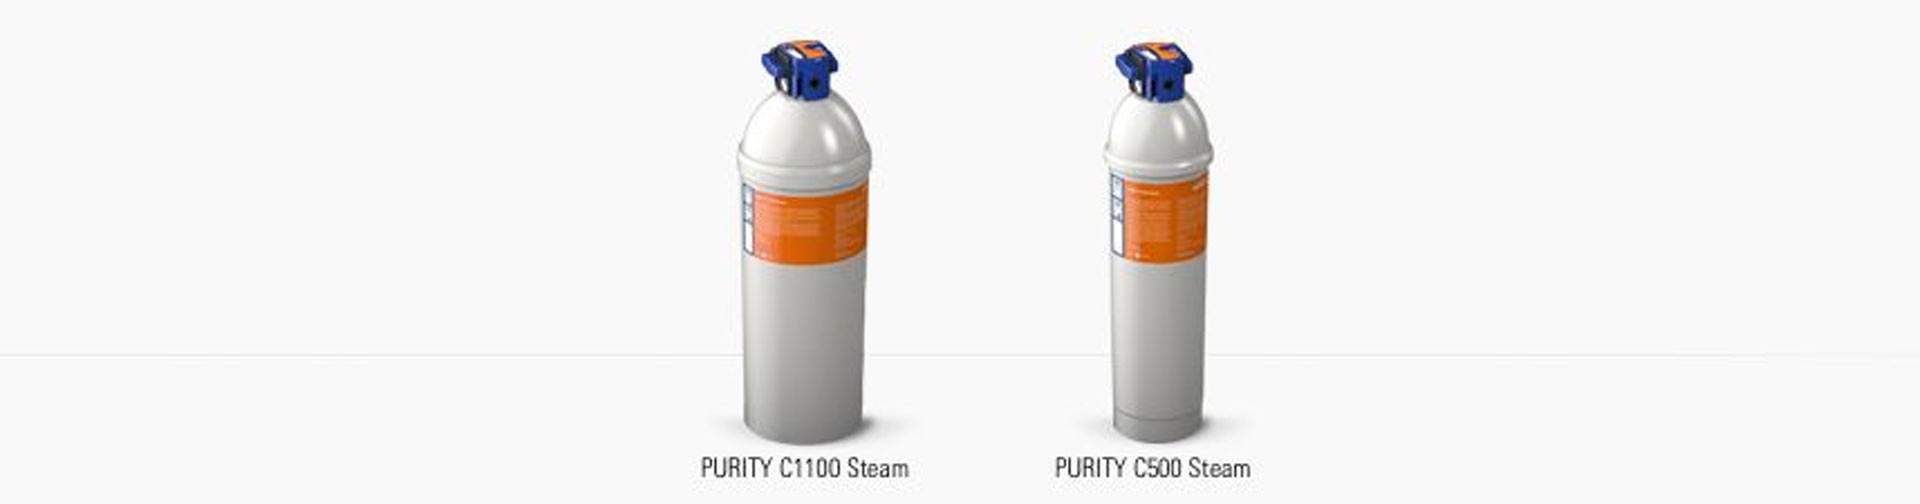 PURITY C Steam